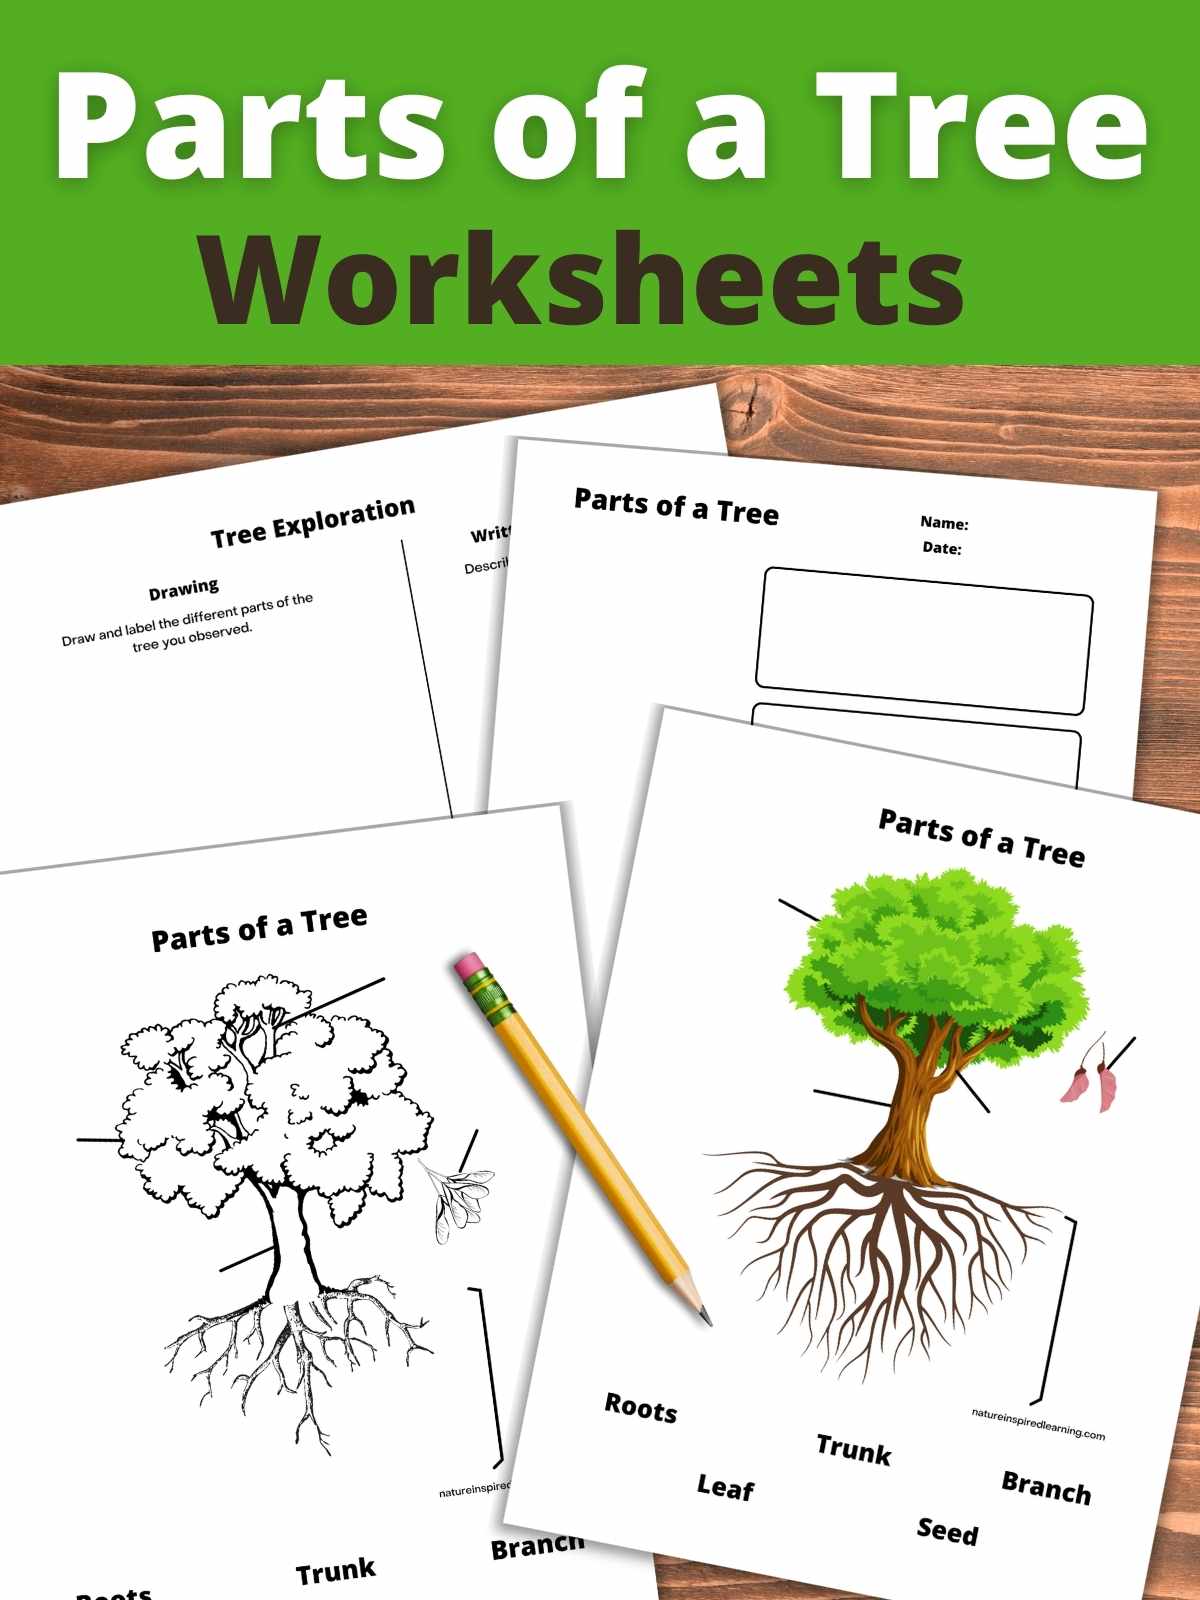 parts of a tree worksheets overlapping on a wooden background. Text overlay across top with green background.